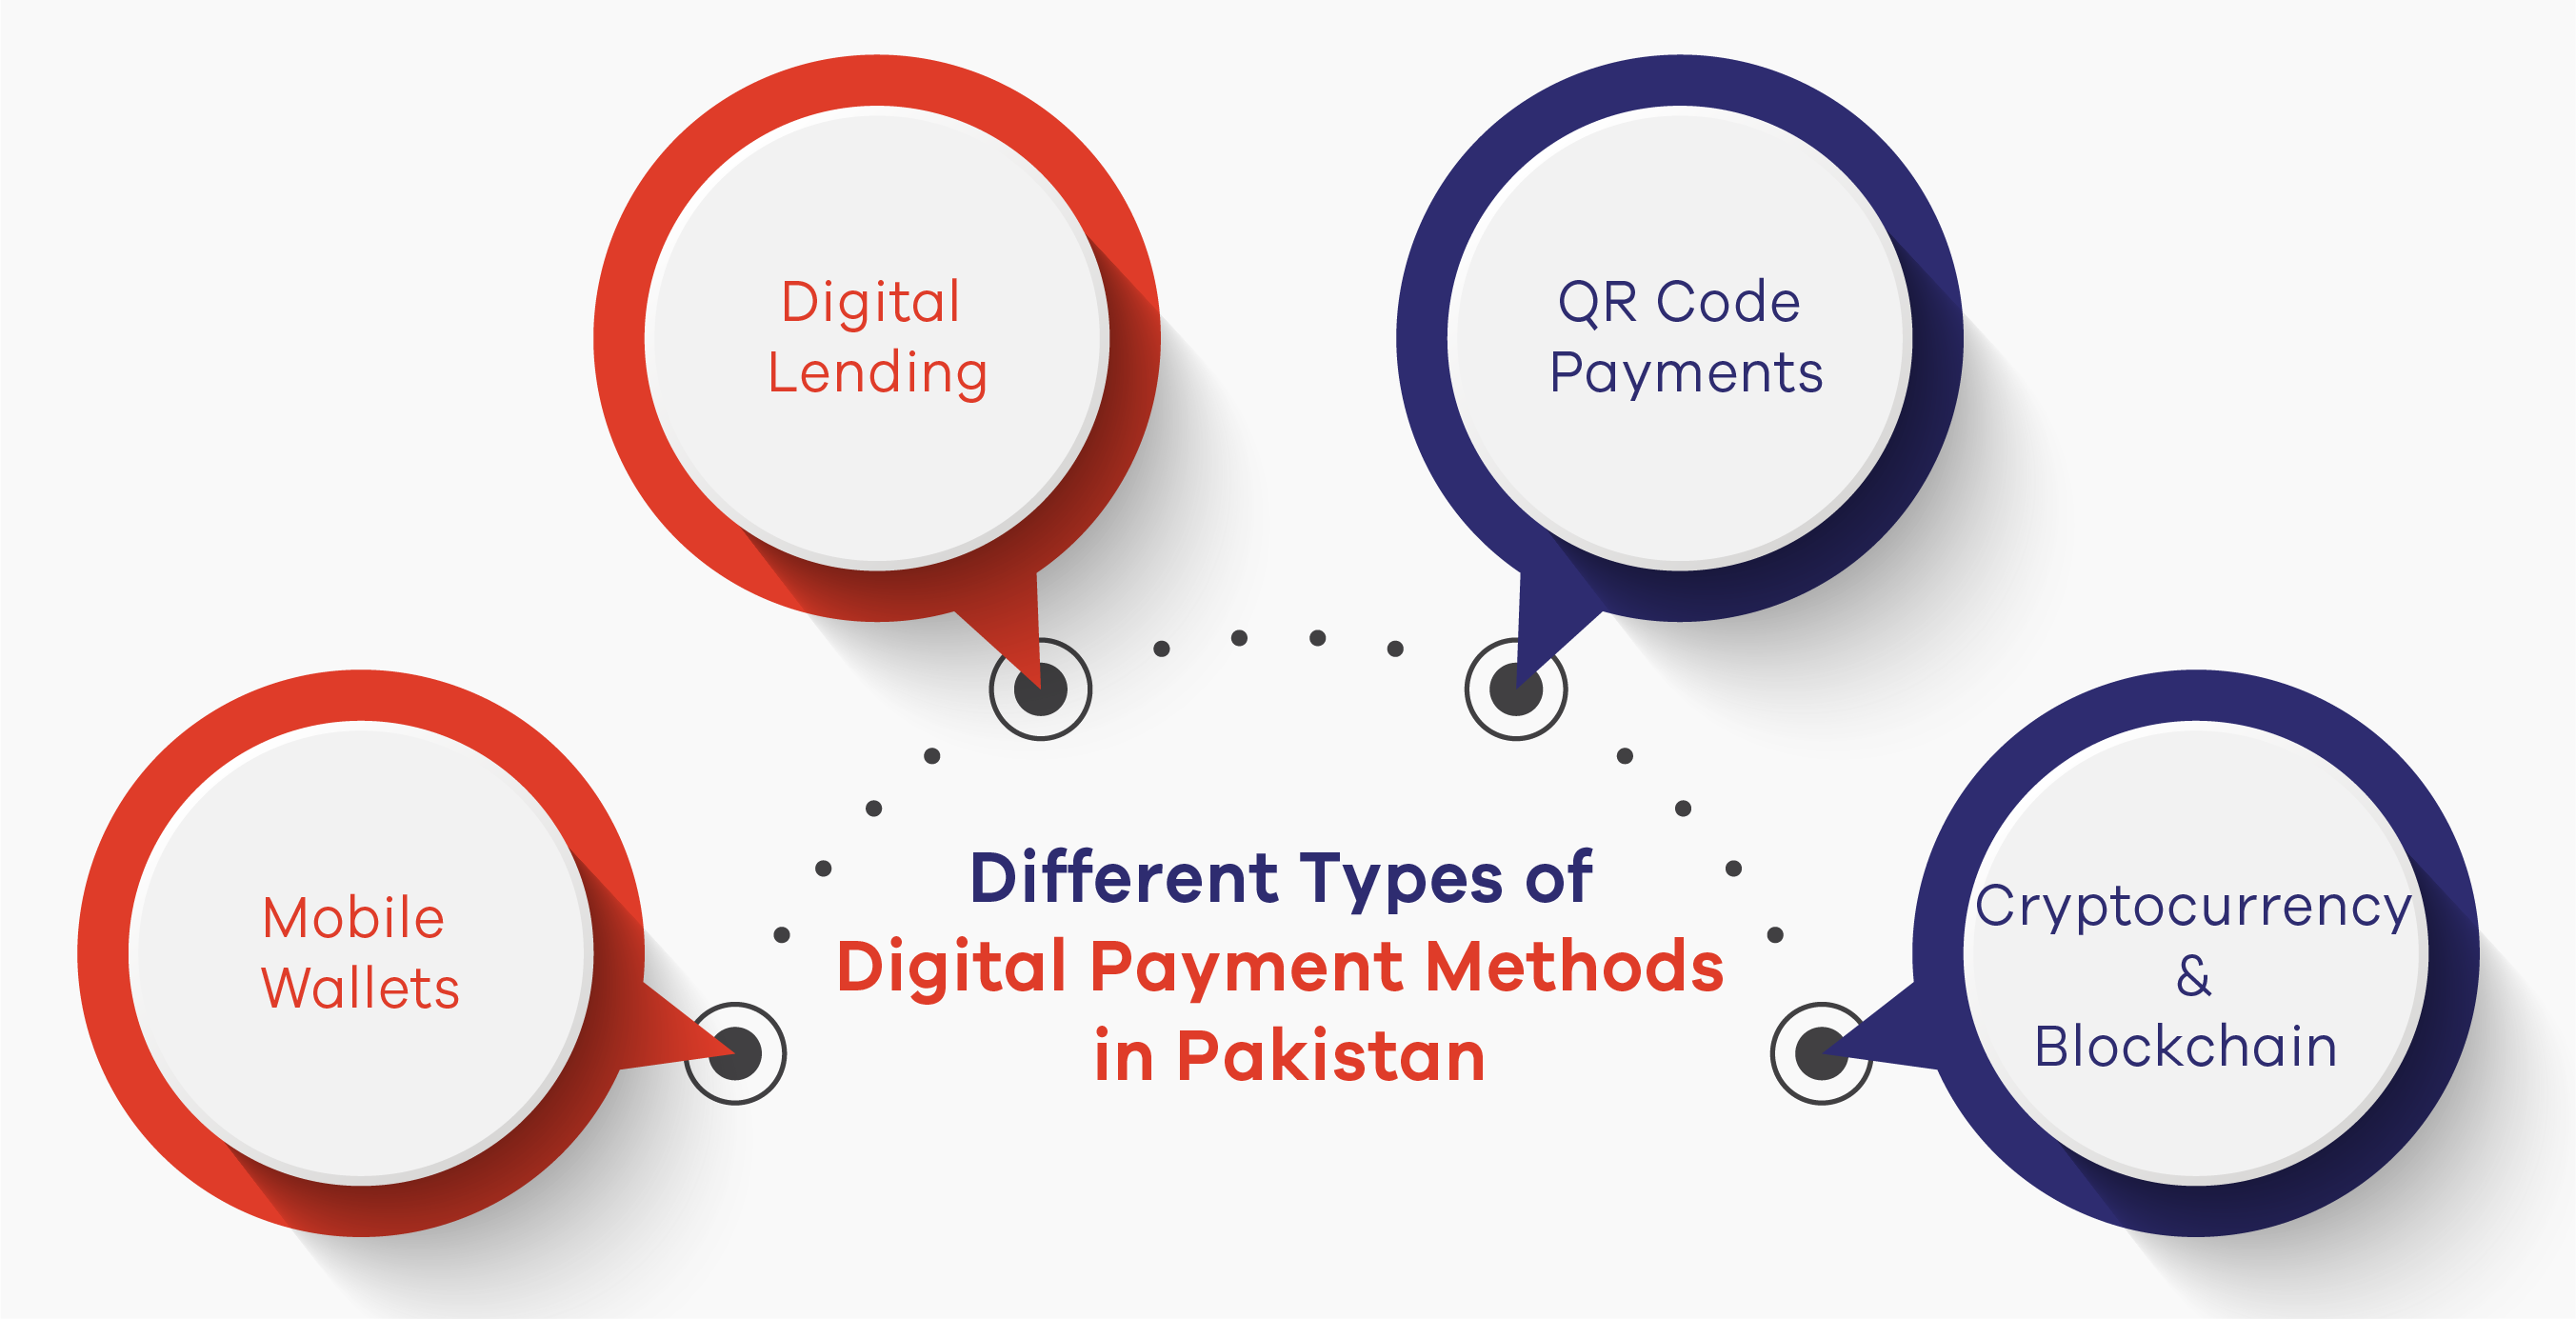 Different Types of Digital Payment Methods in Pakistan